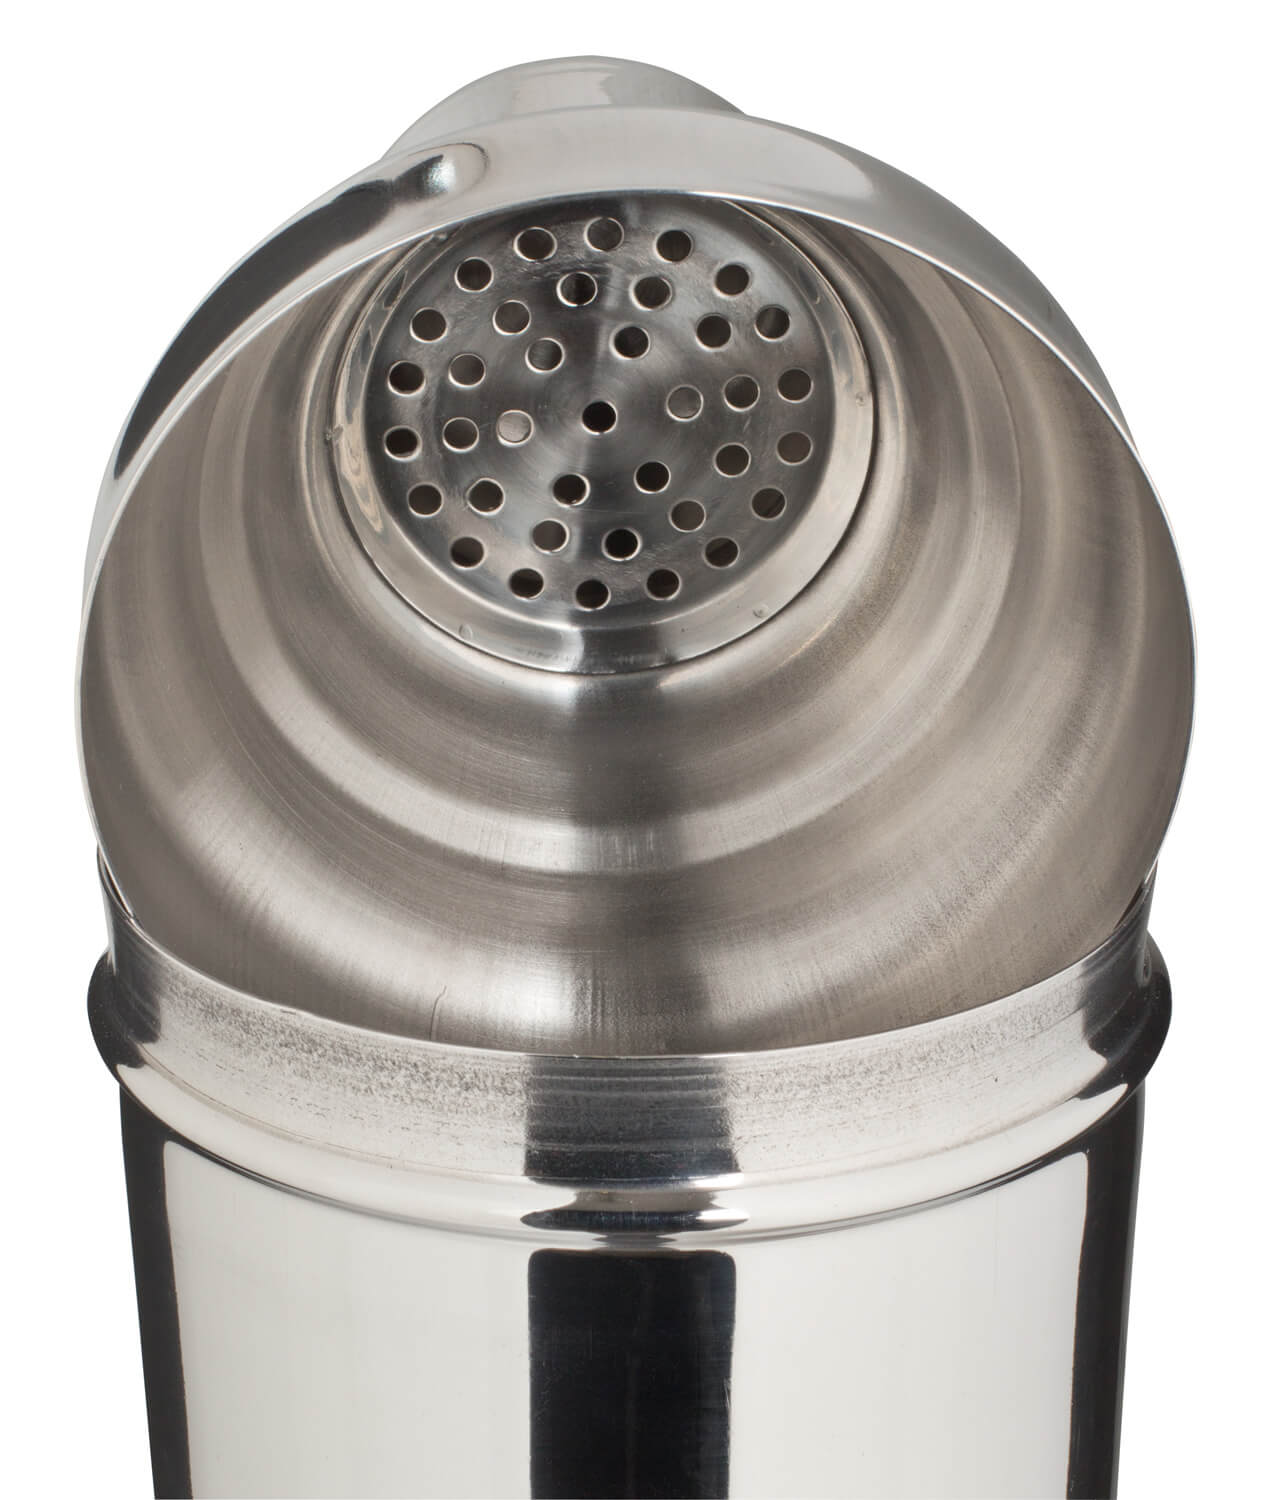 Cocktail shaker, stainless steel, tripartite, polished - 2000ml